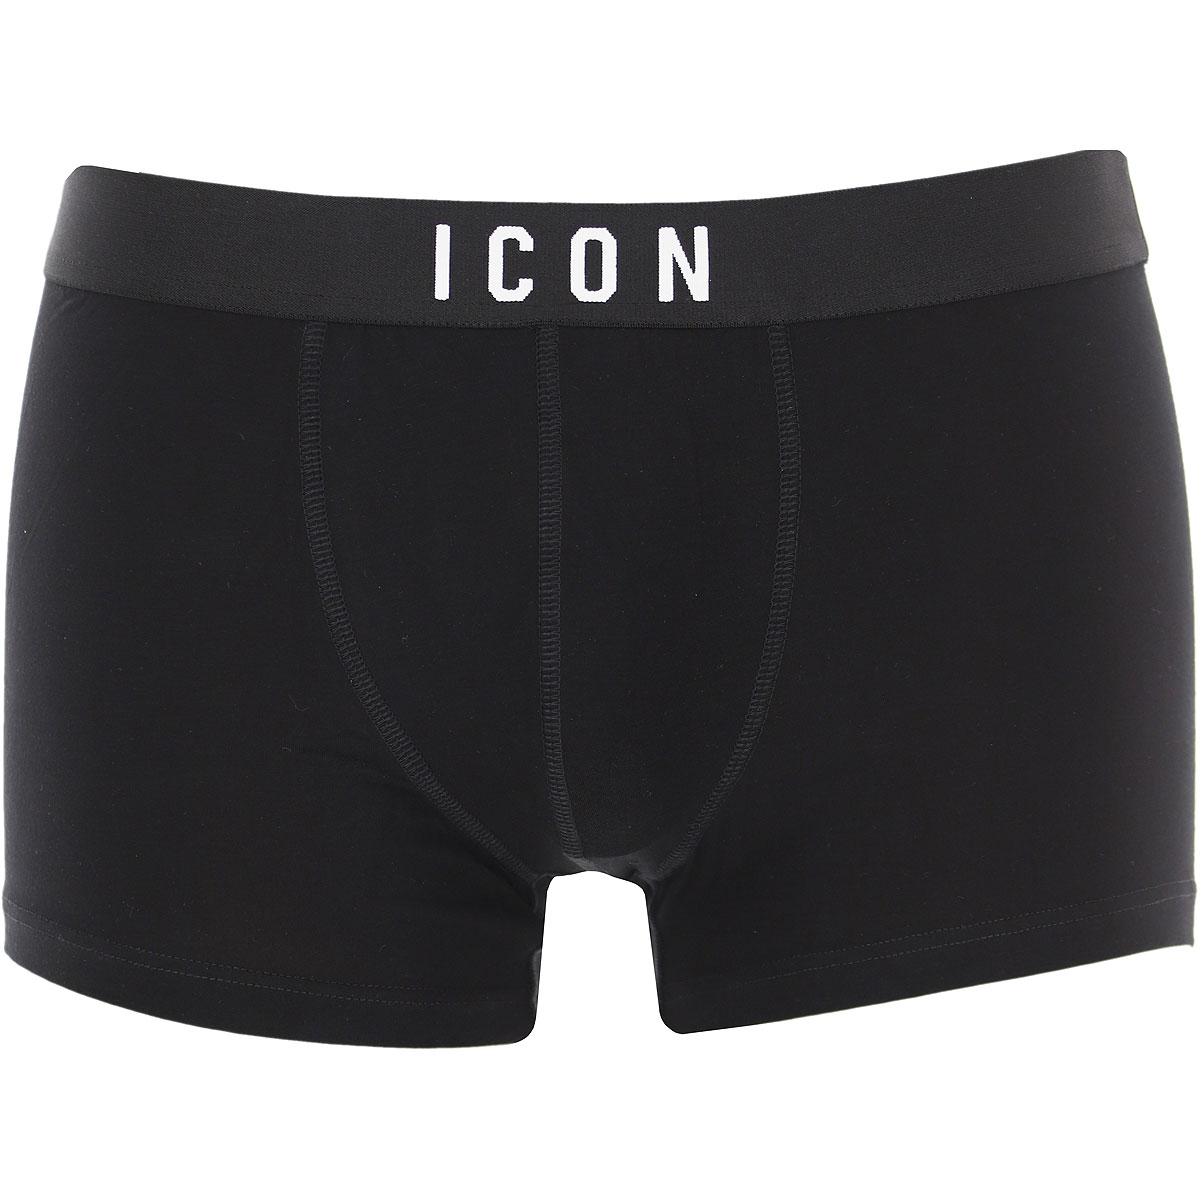 Mens Underwear Dsquared2, Style code: d9lc63590-003-